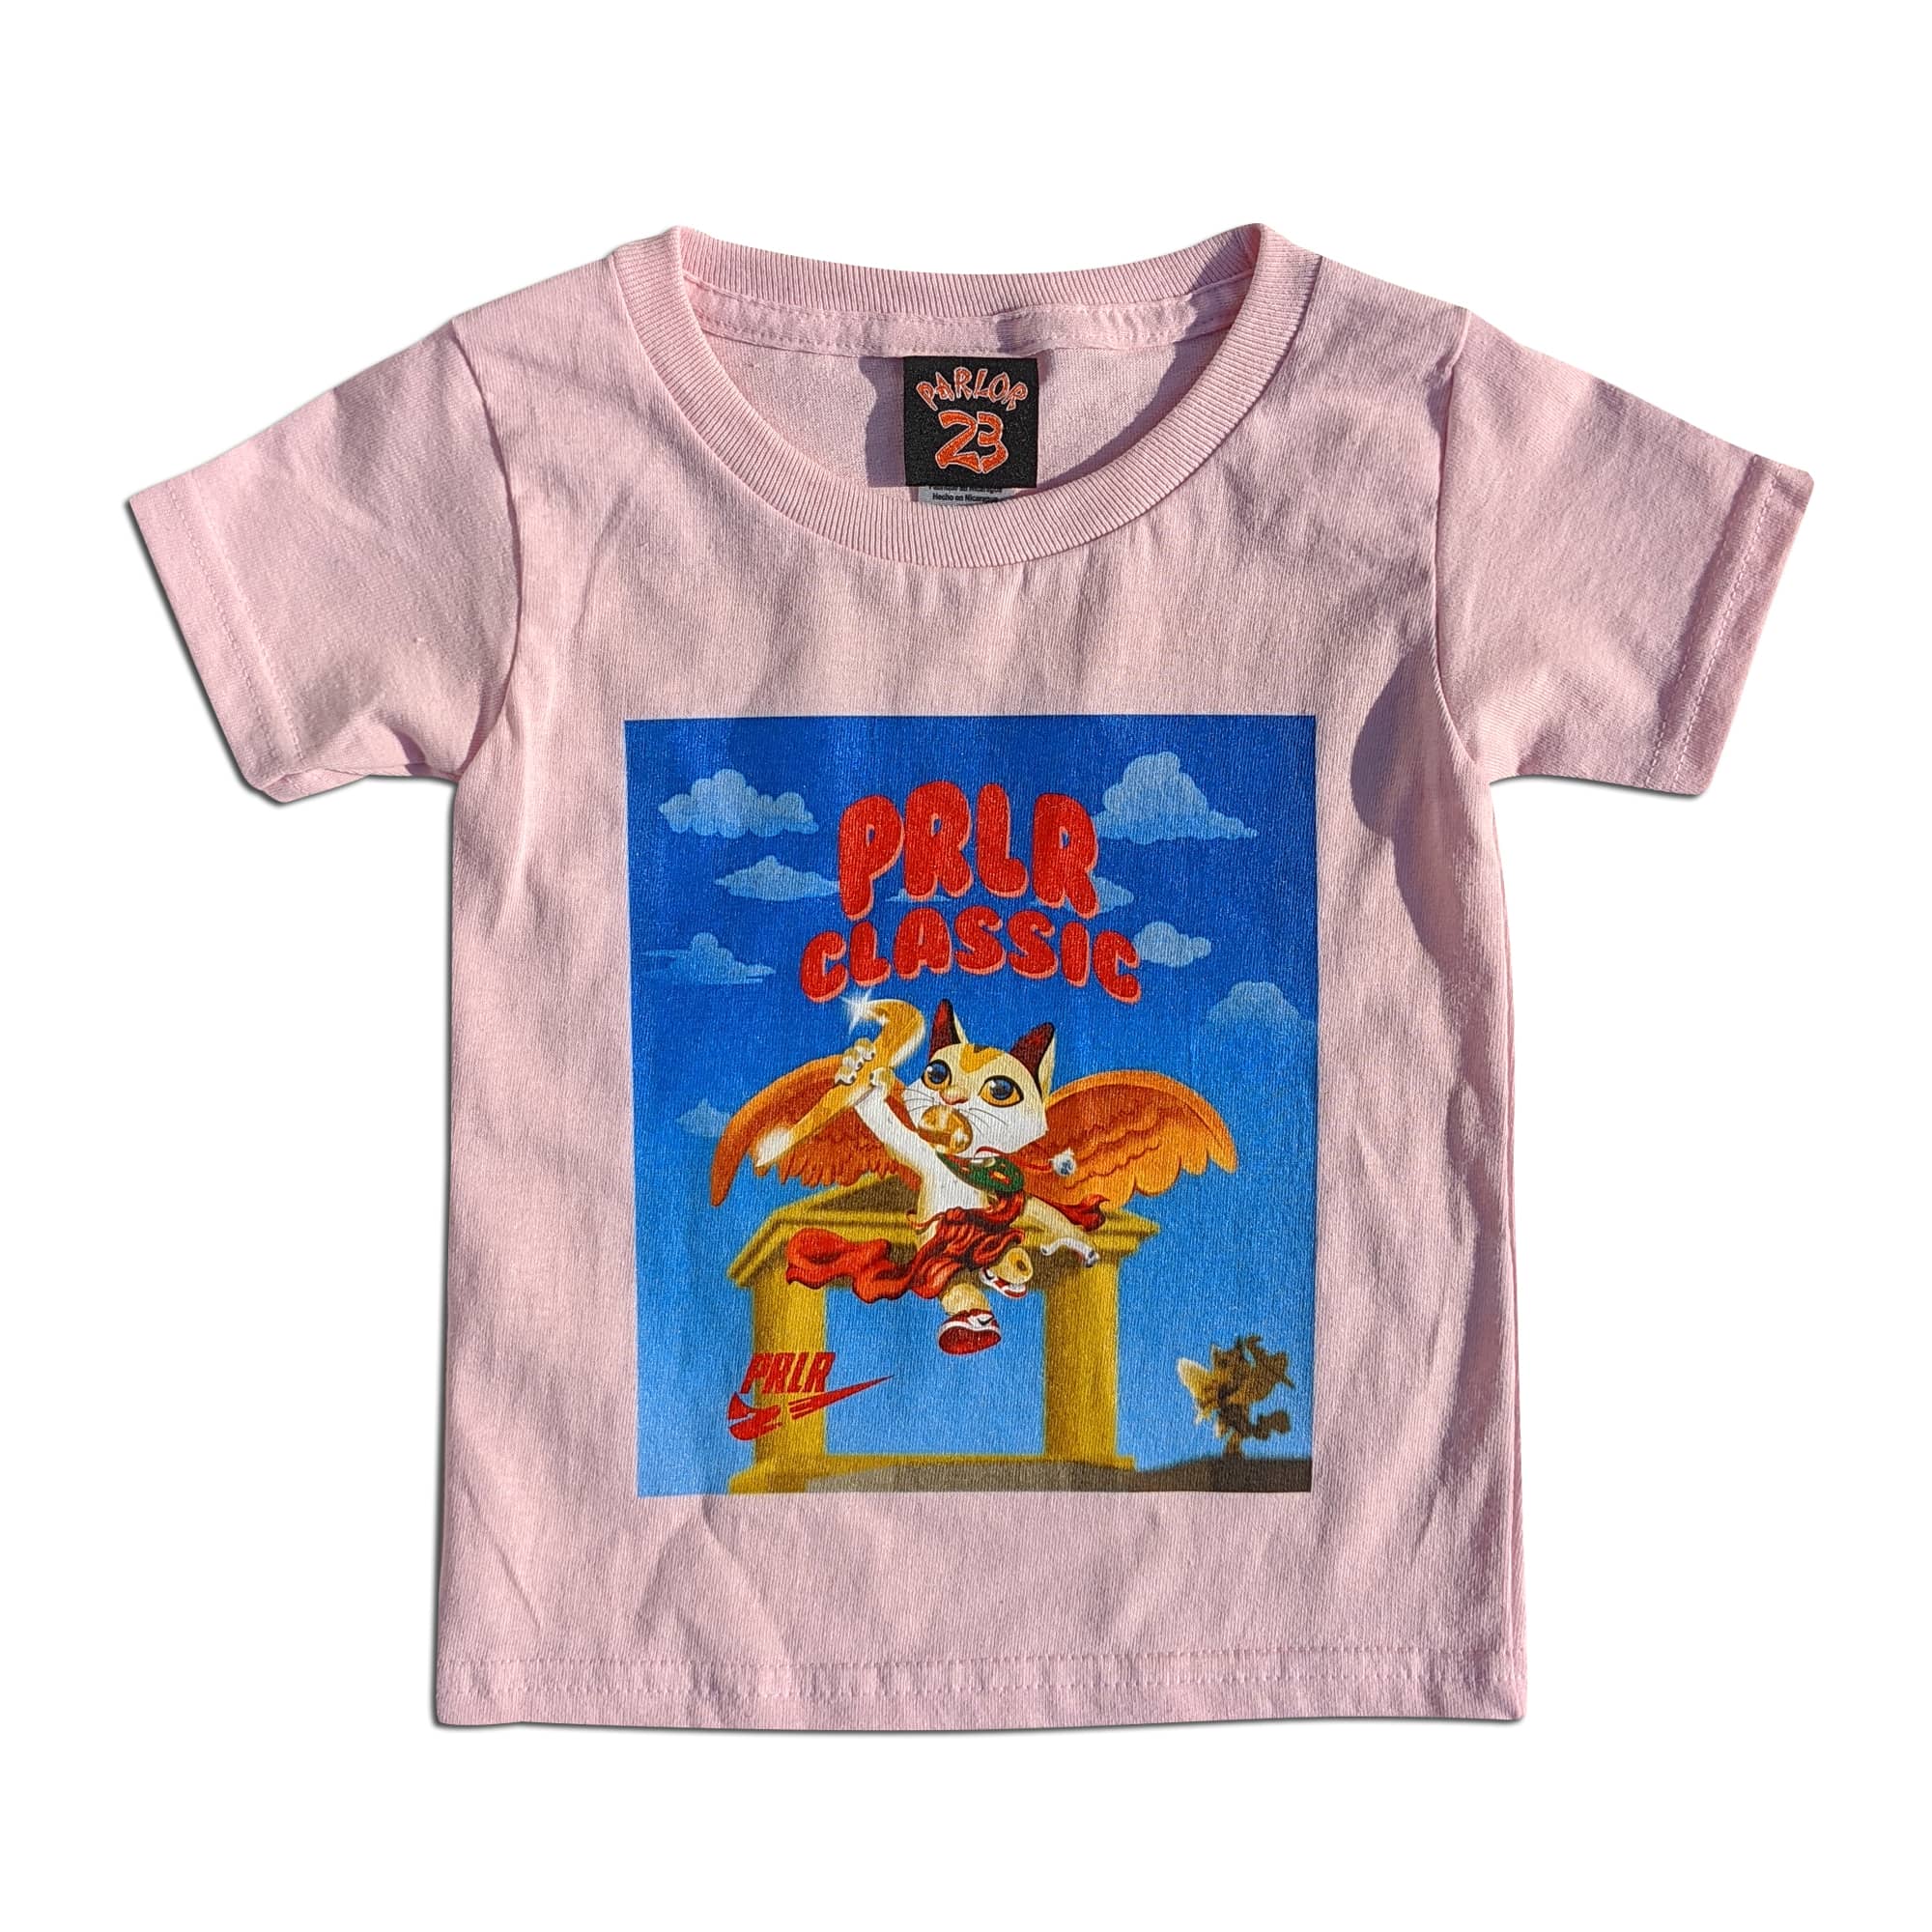 Parlor 23 Toddler "PRLR Classic" T-Shirt